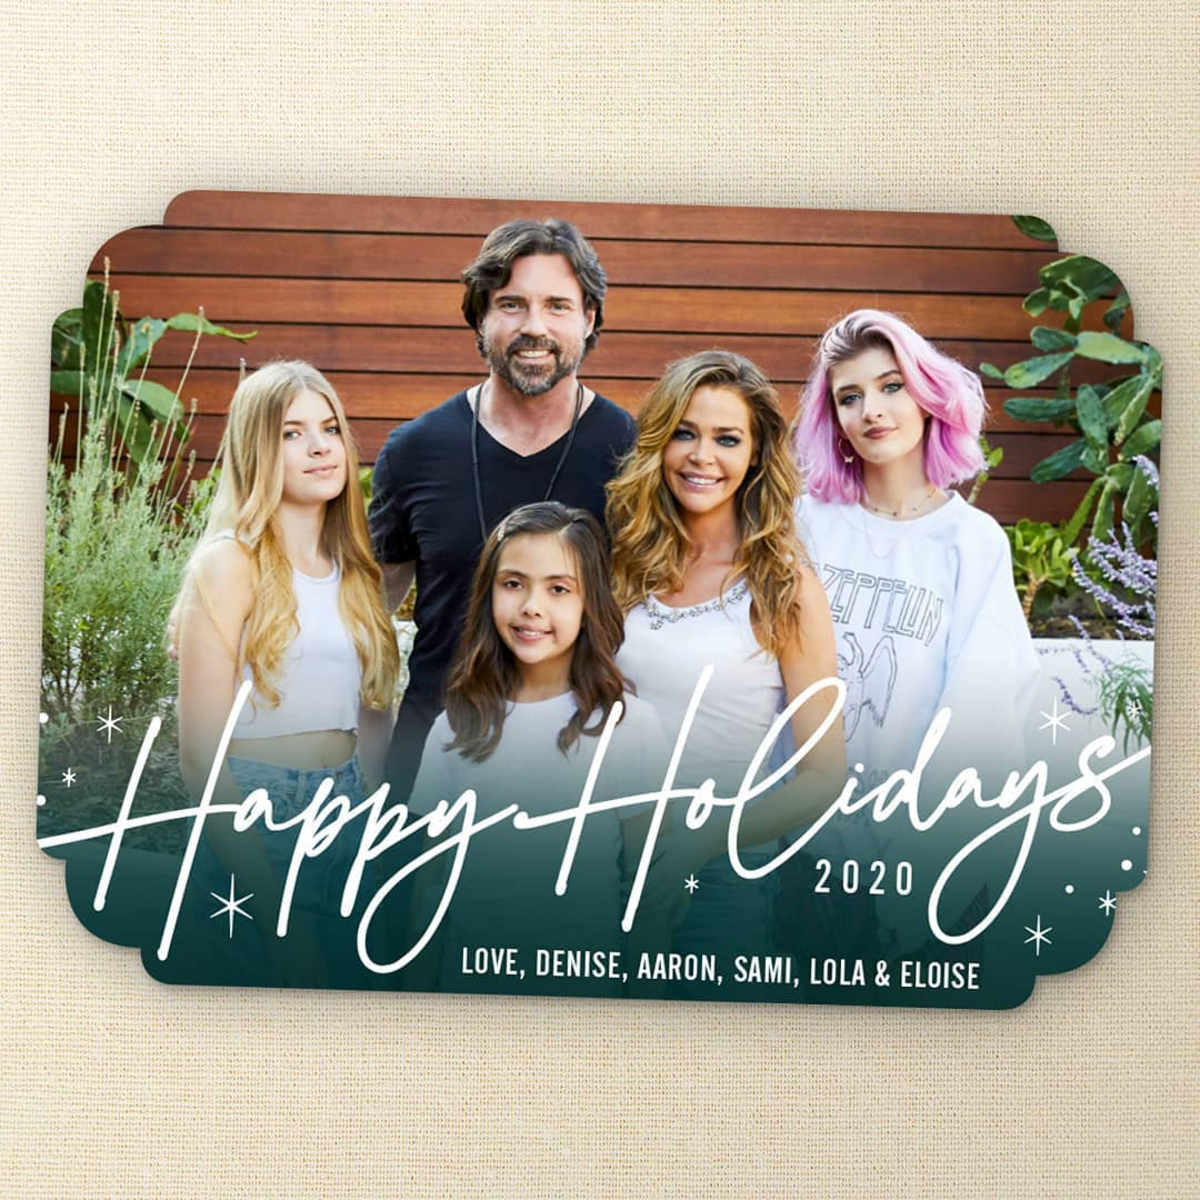 Photos from Celebrity Christmas Cards - Page 2 - E! Online